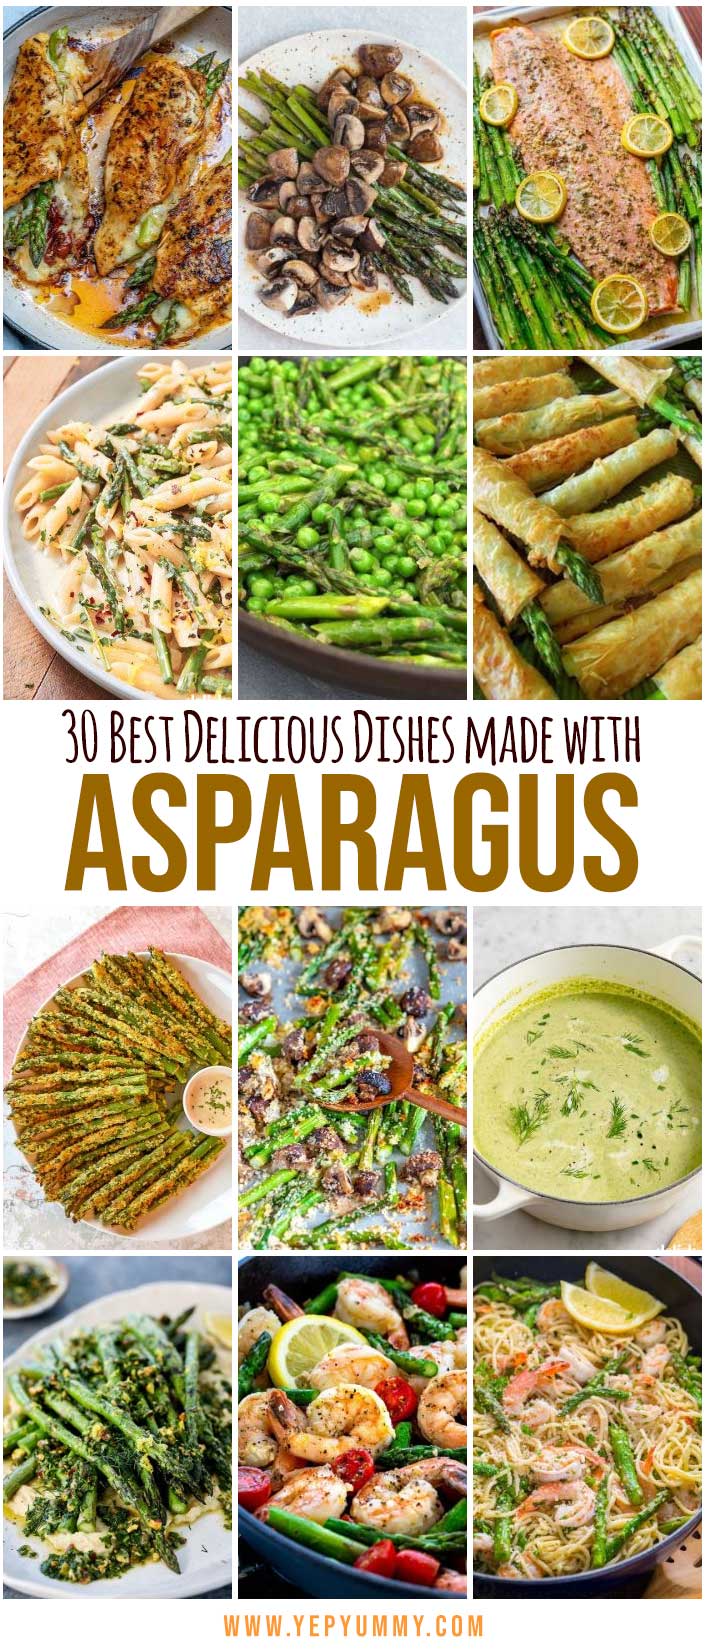 30 Best Delicious Dishes Made With Asparagus